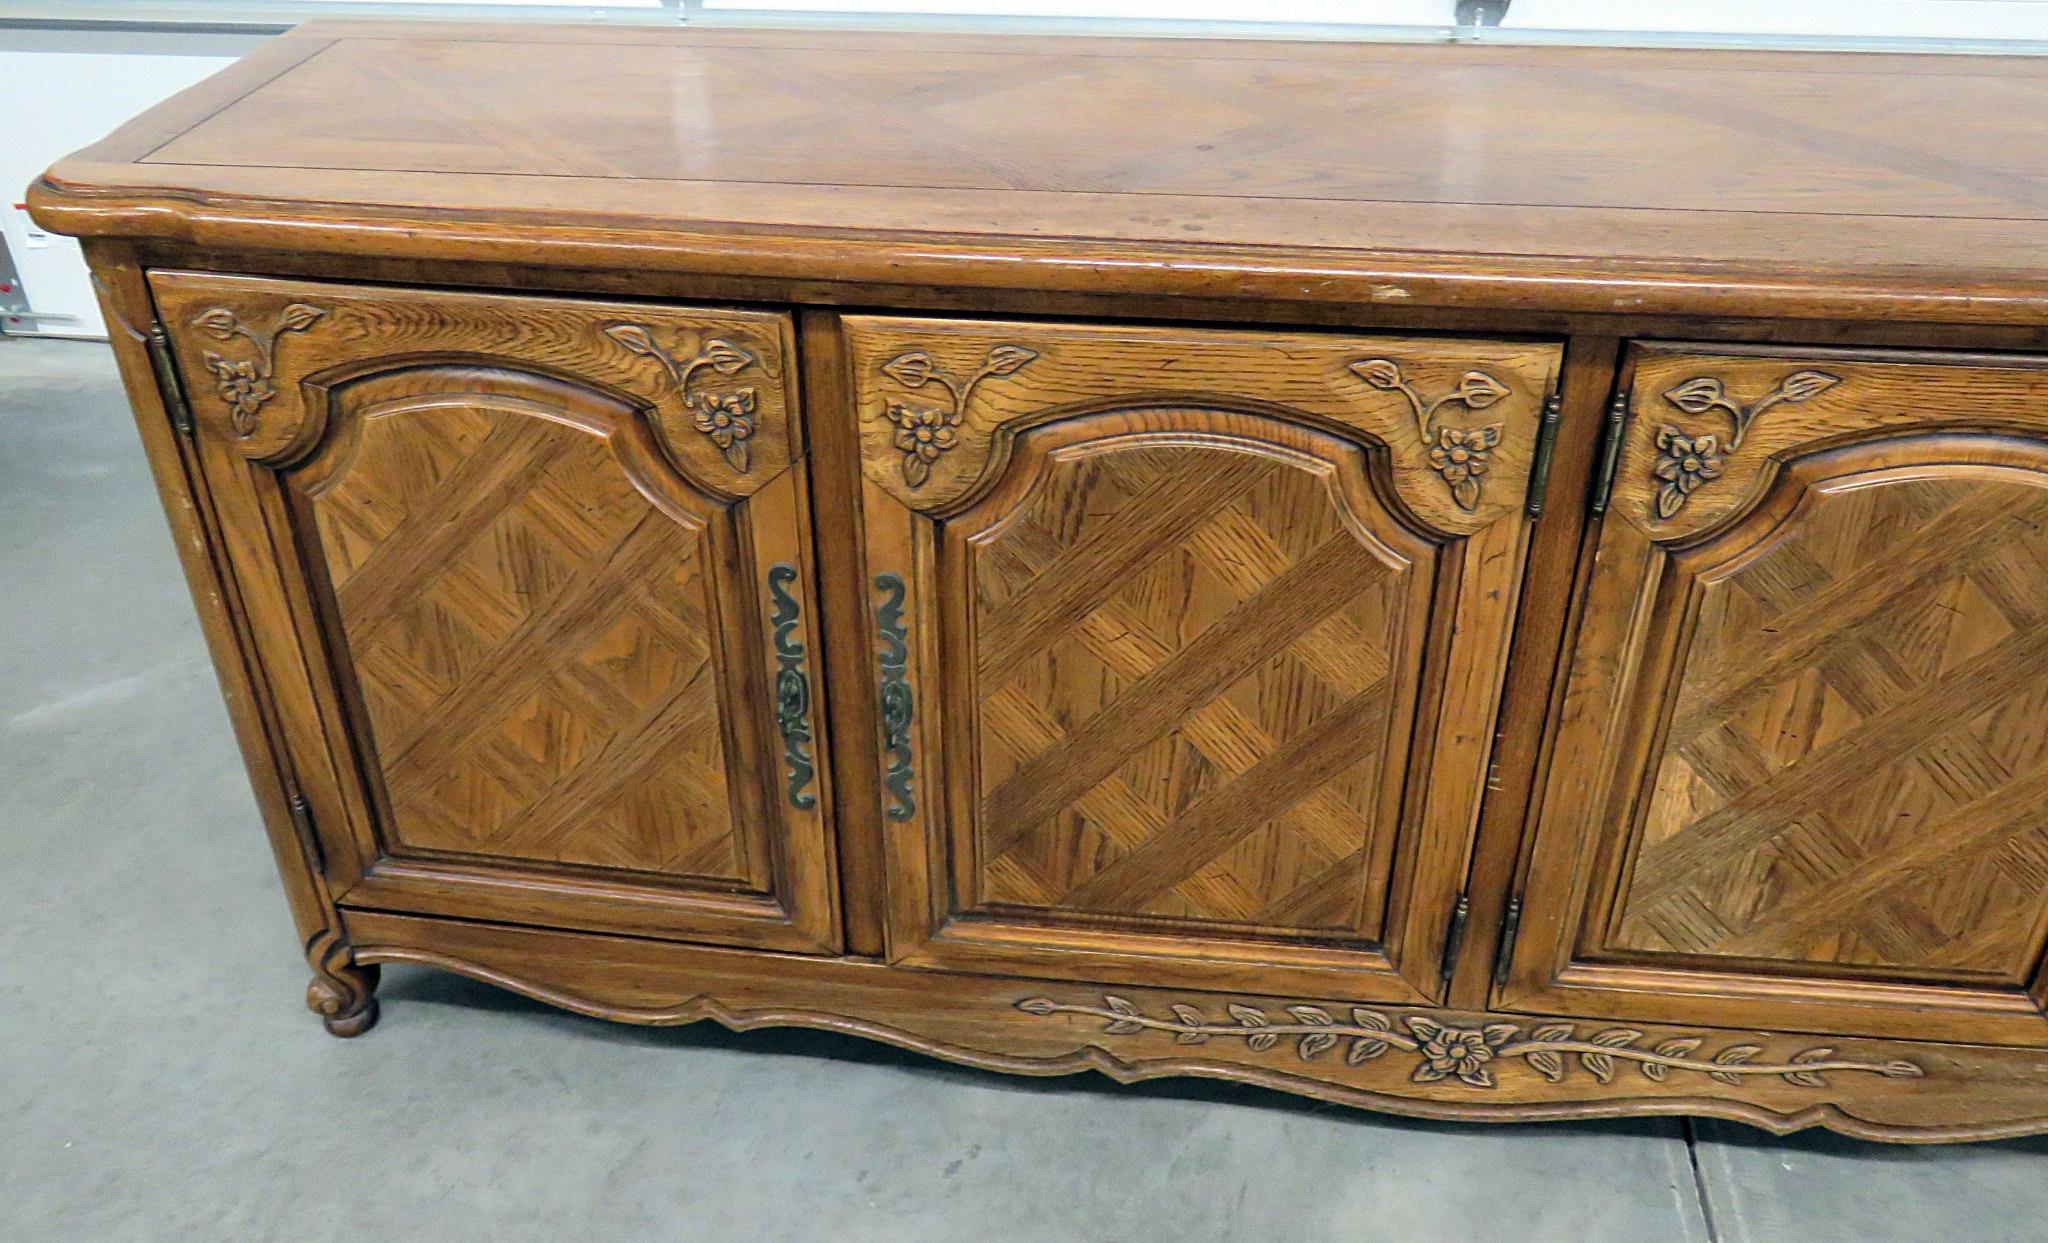 Thomasville Country French style sideboard with 2 doors that contain 3 drawers and 2 doors that contain 1 shelf.